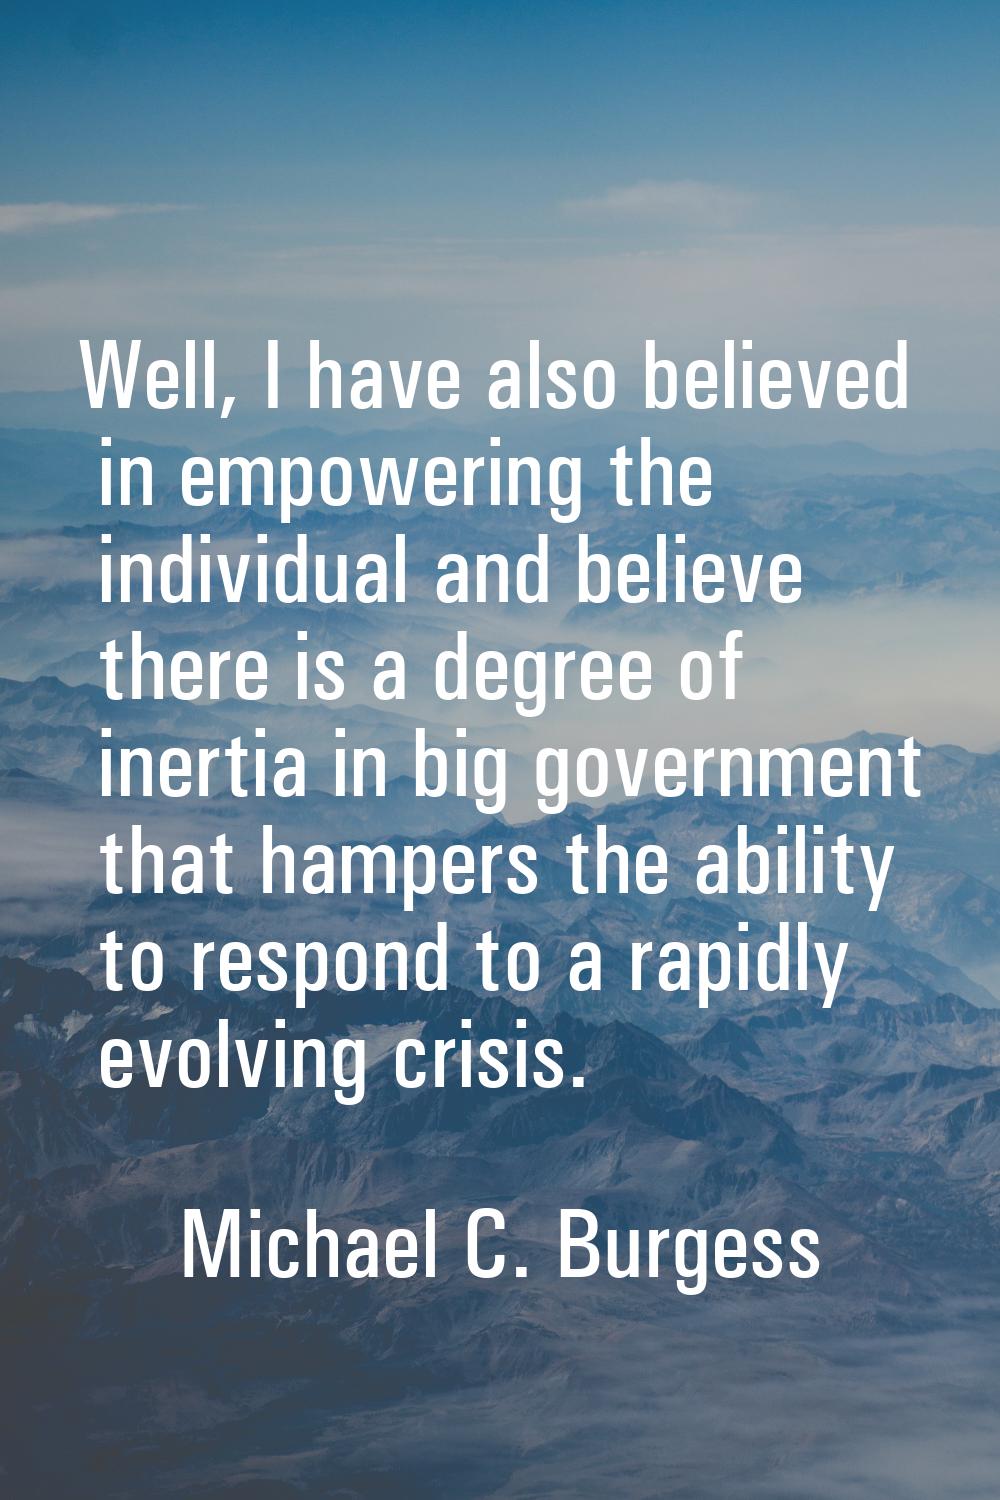 Well, I have also believed in empowering the individual and believe there is a degree of inertia in